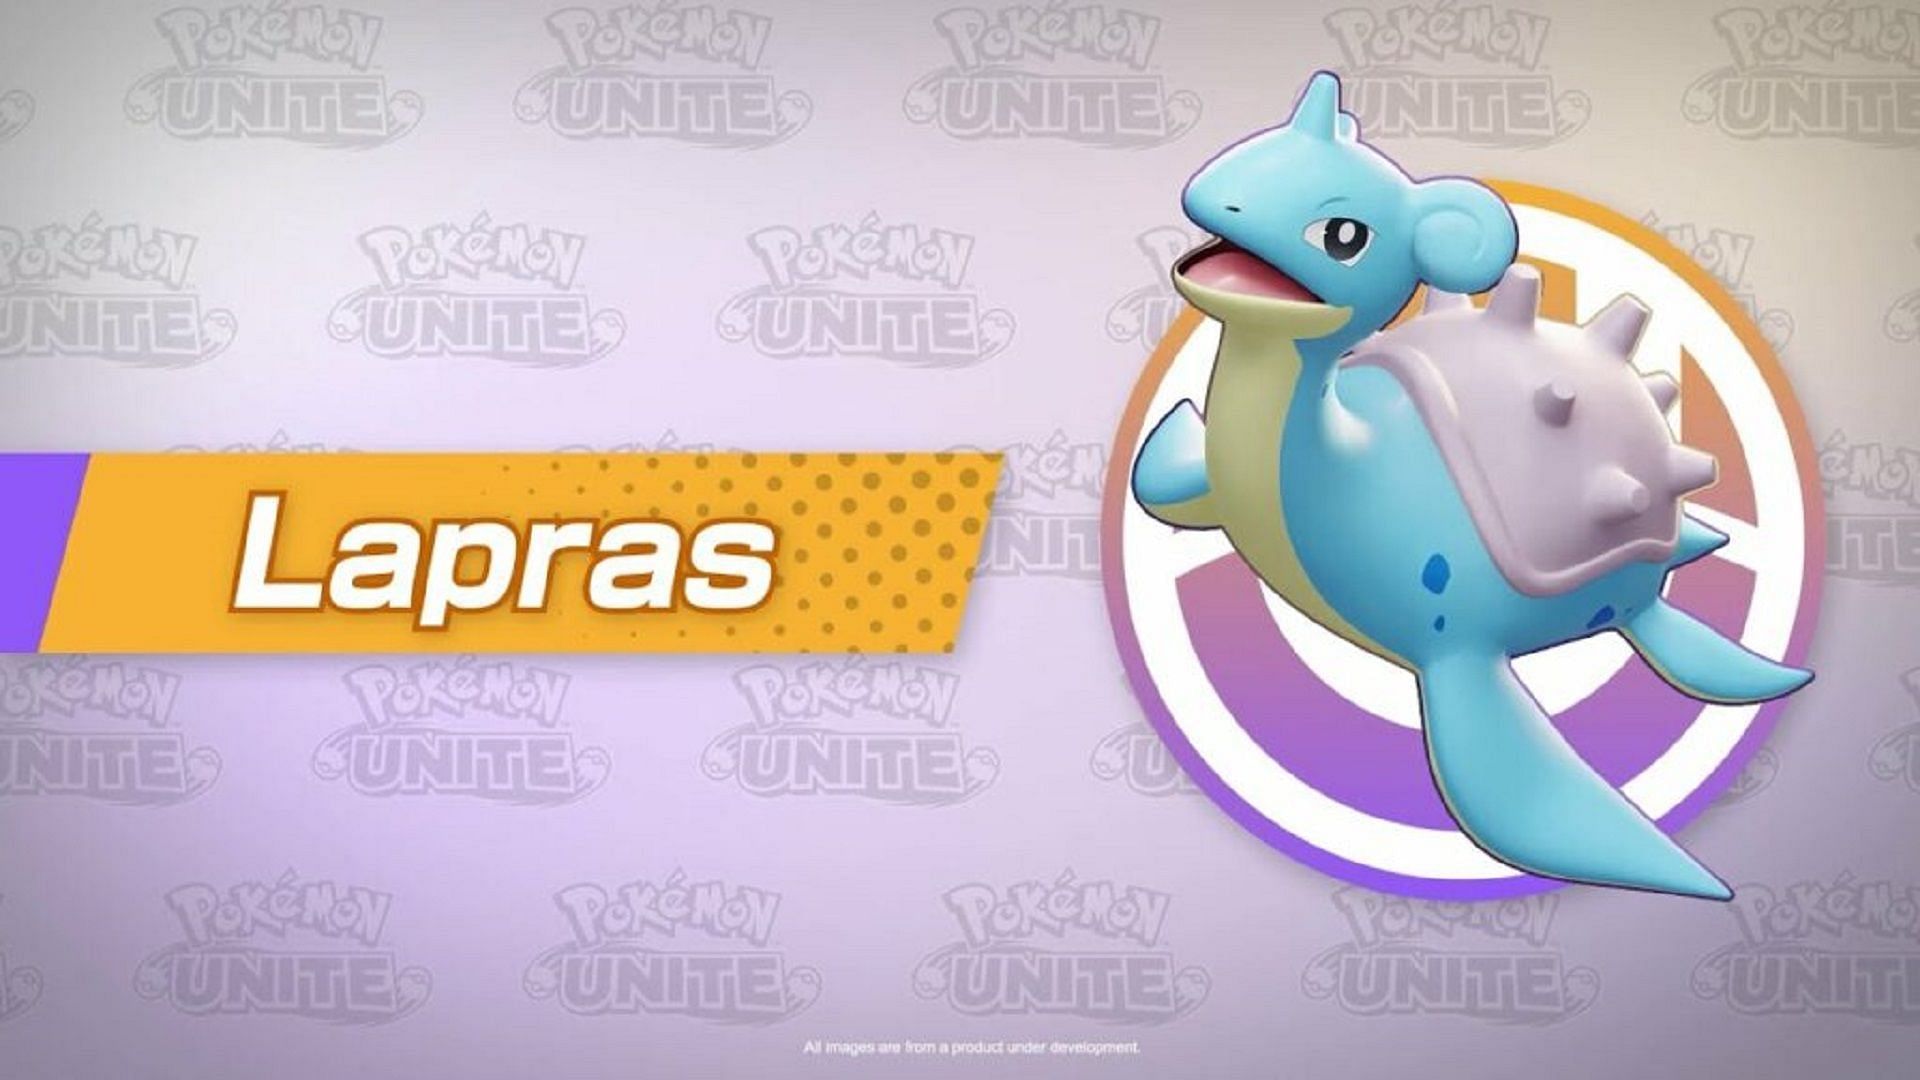 Lapras is a Pokemon Unite License that fills the Defender role on a team.